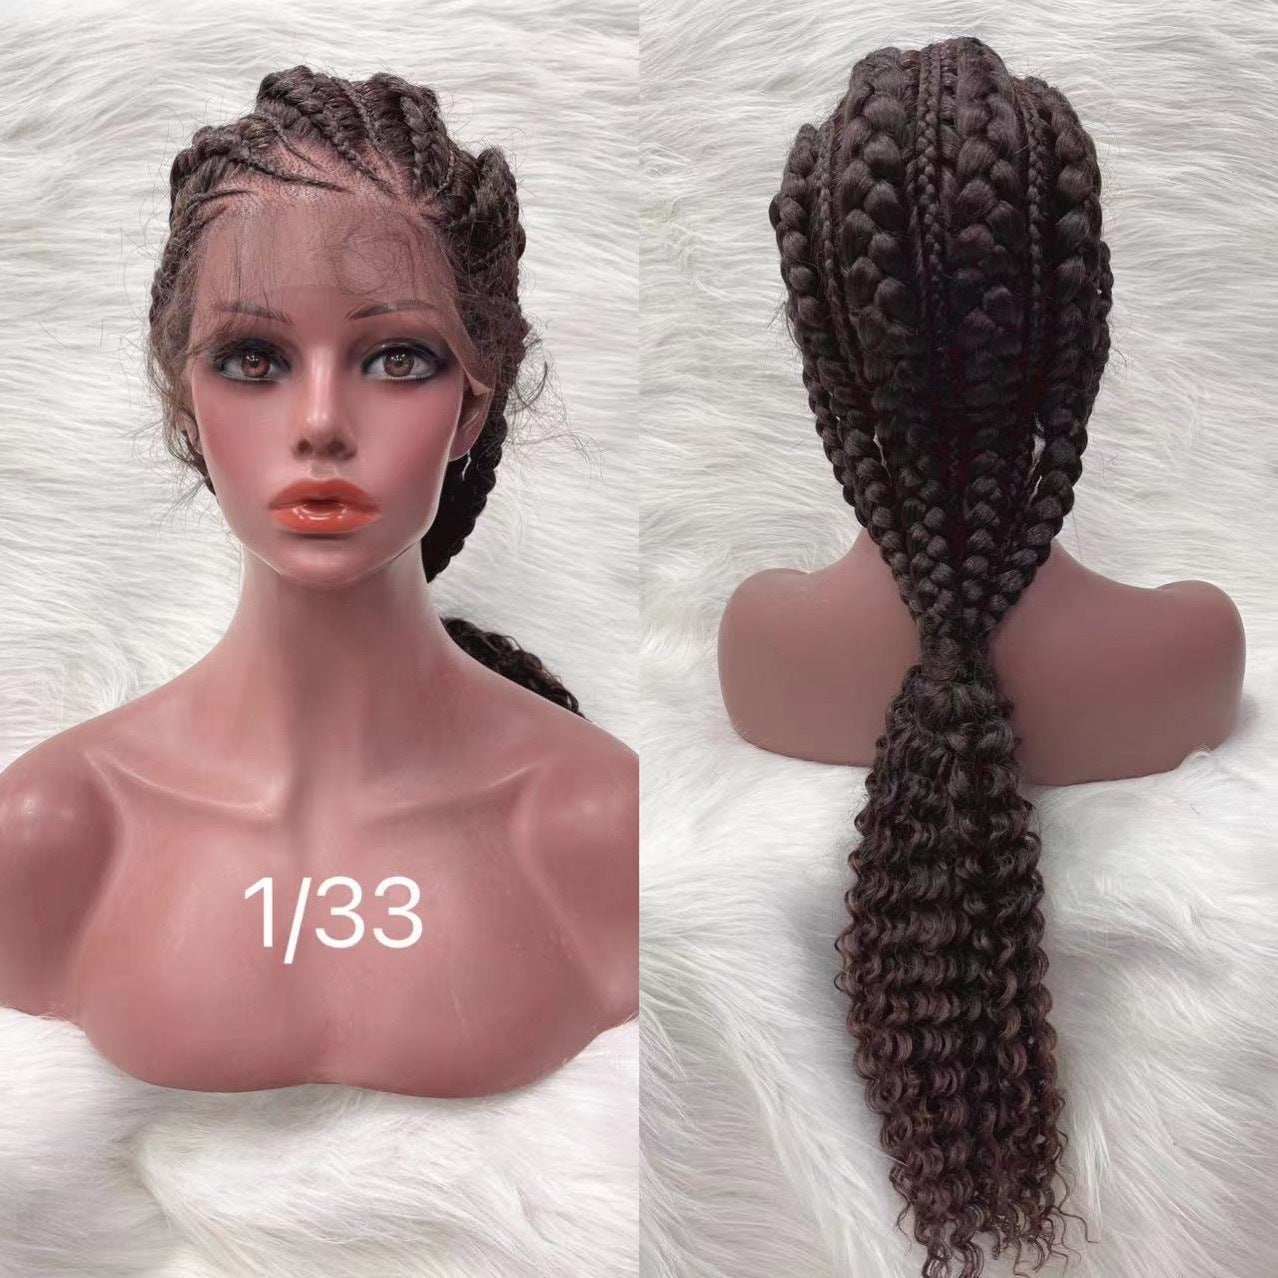 2022 Latest Style Front Lace Braided Wigs